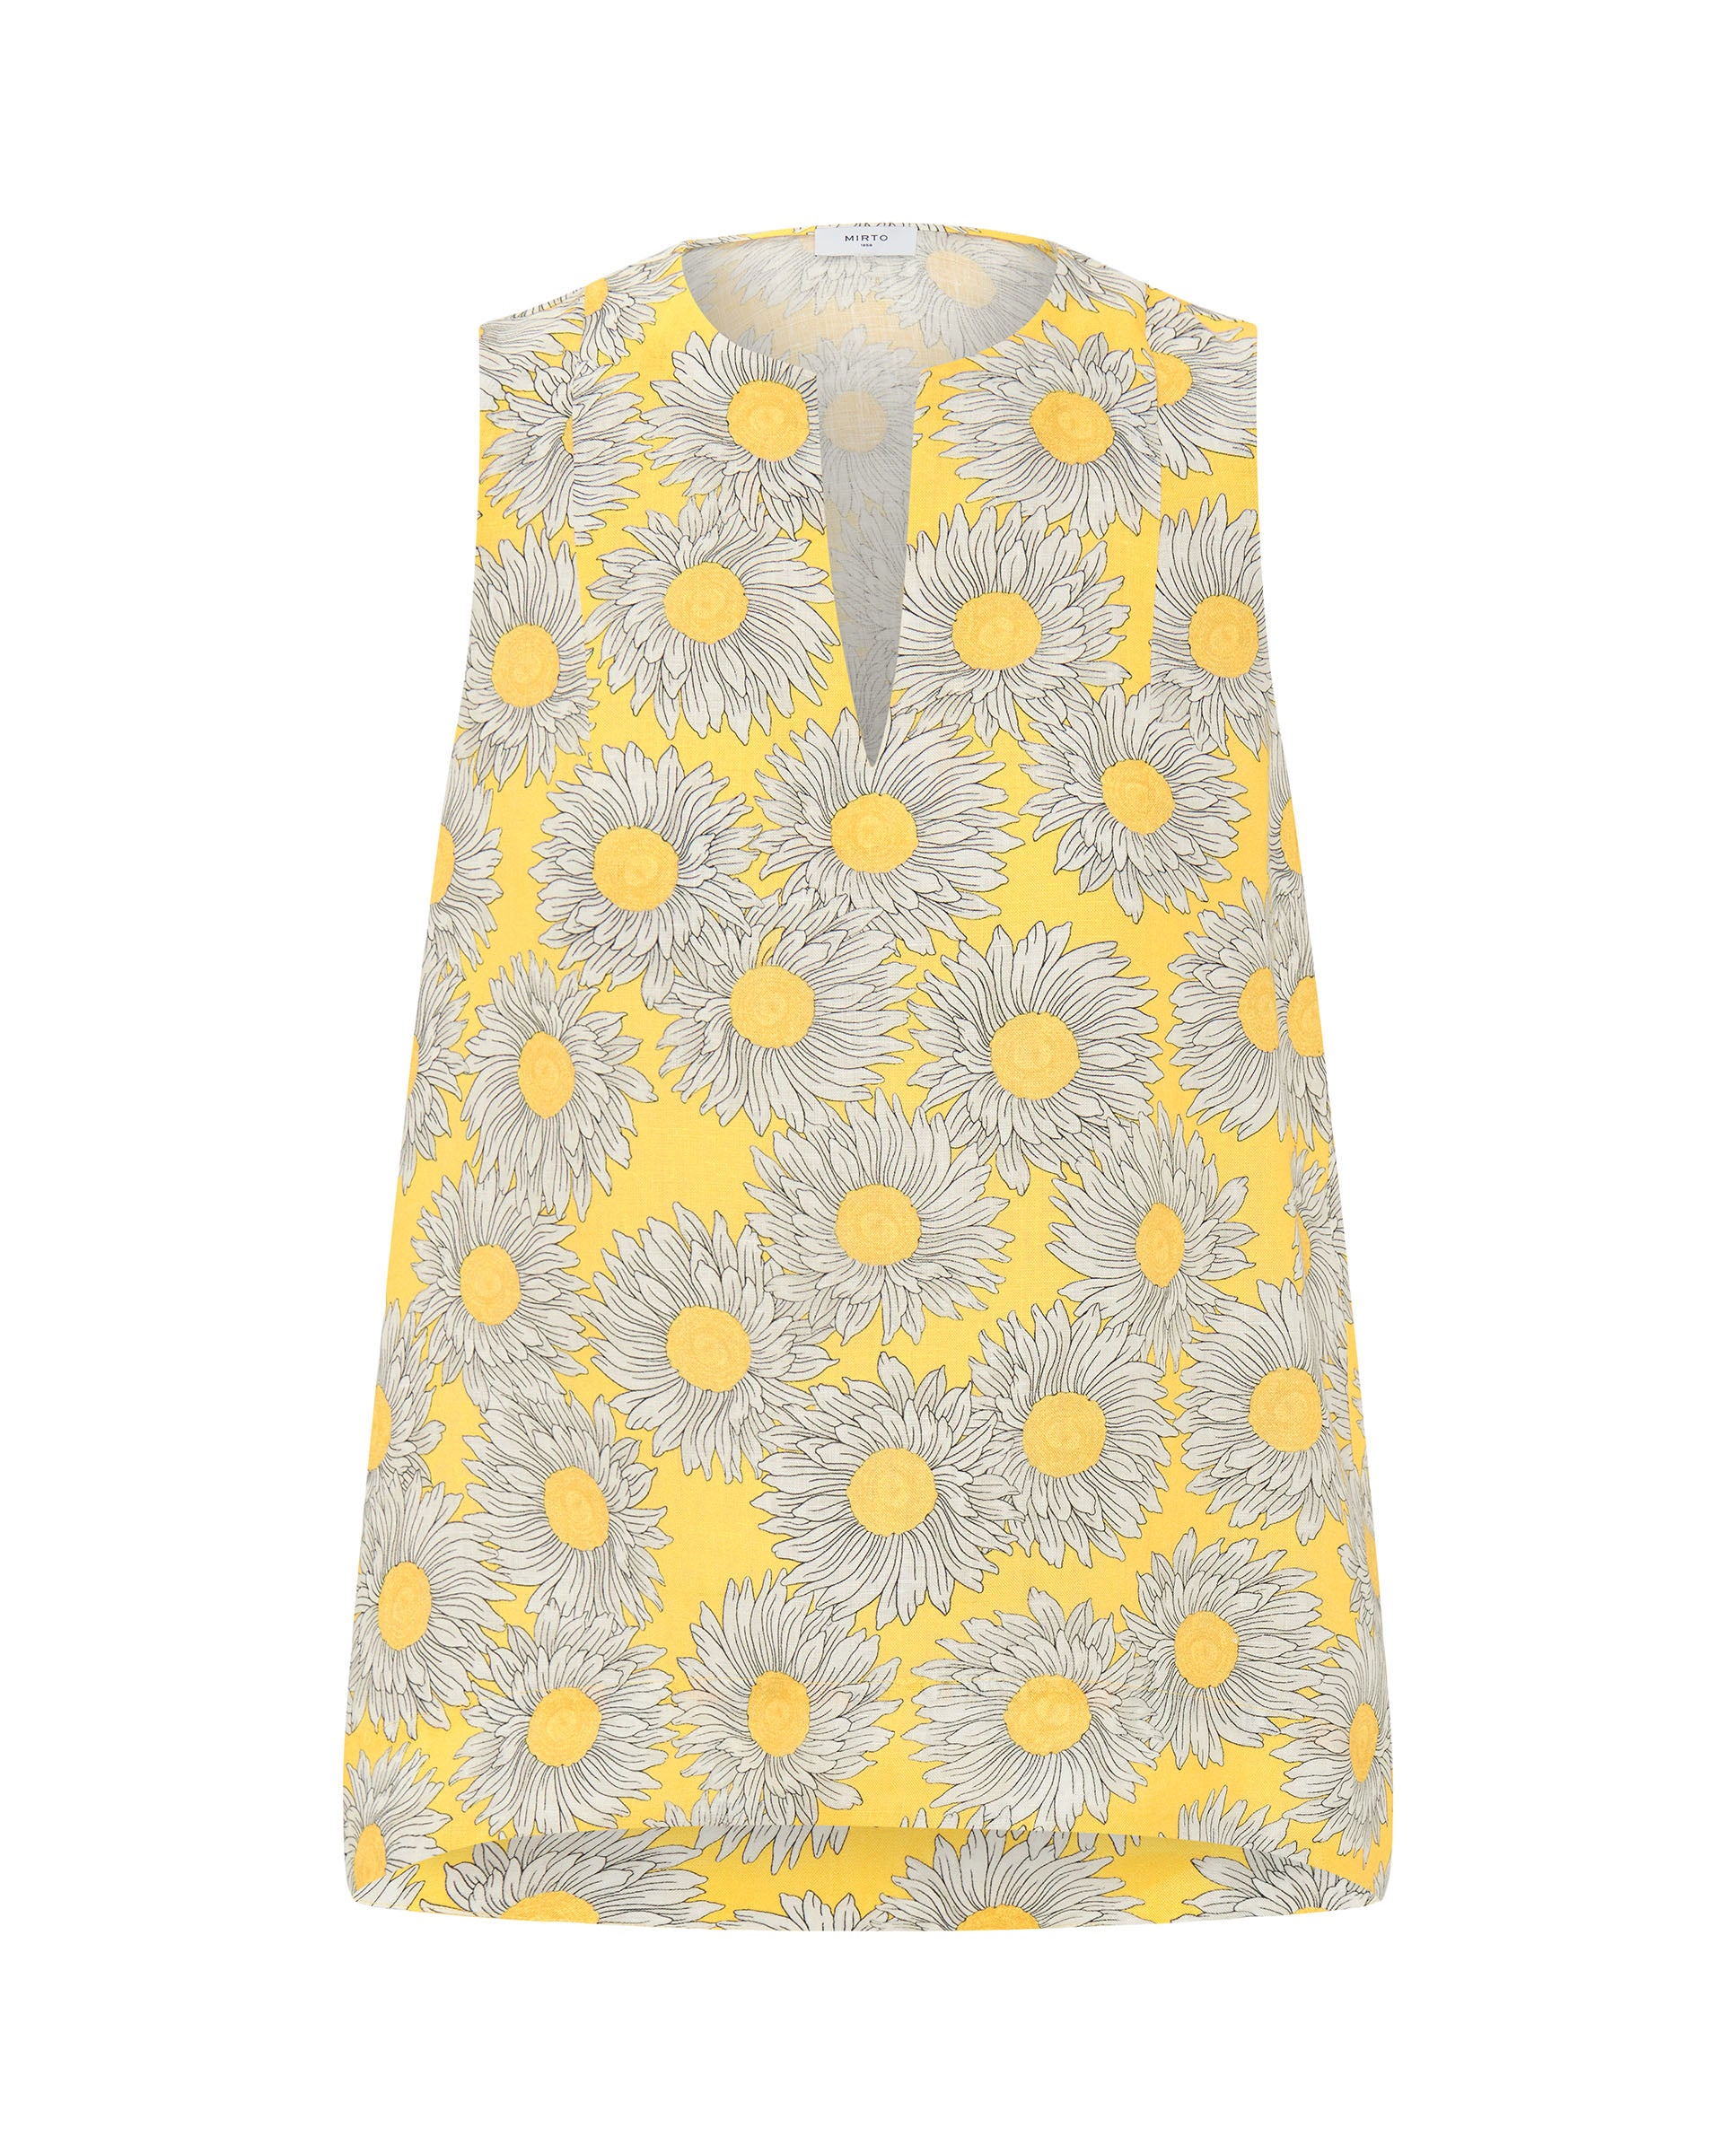 Yellow linen floral print top by MIRTO